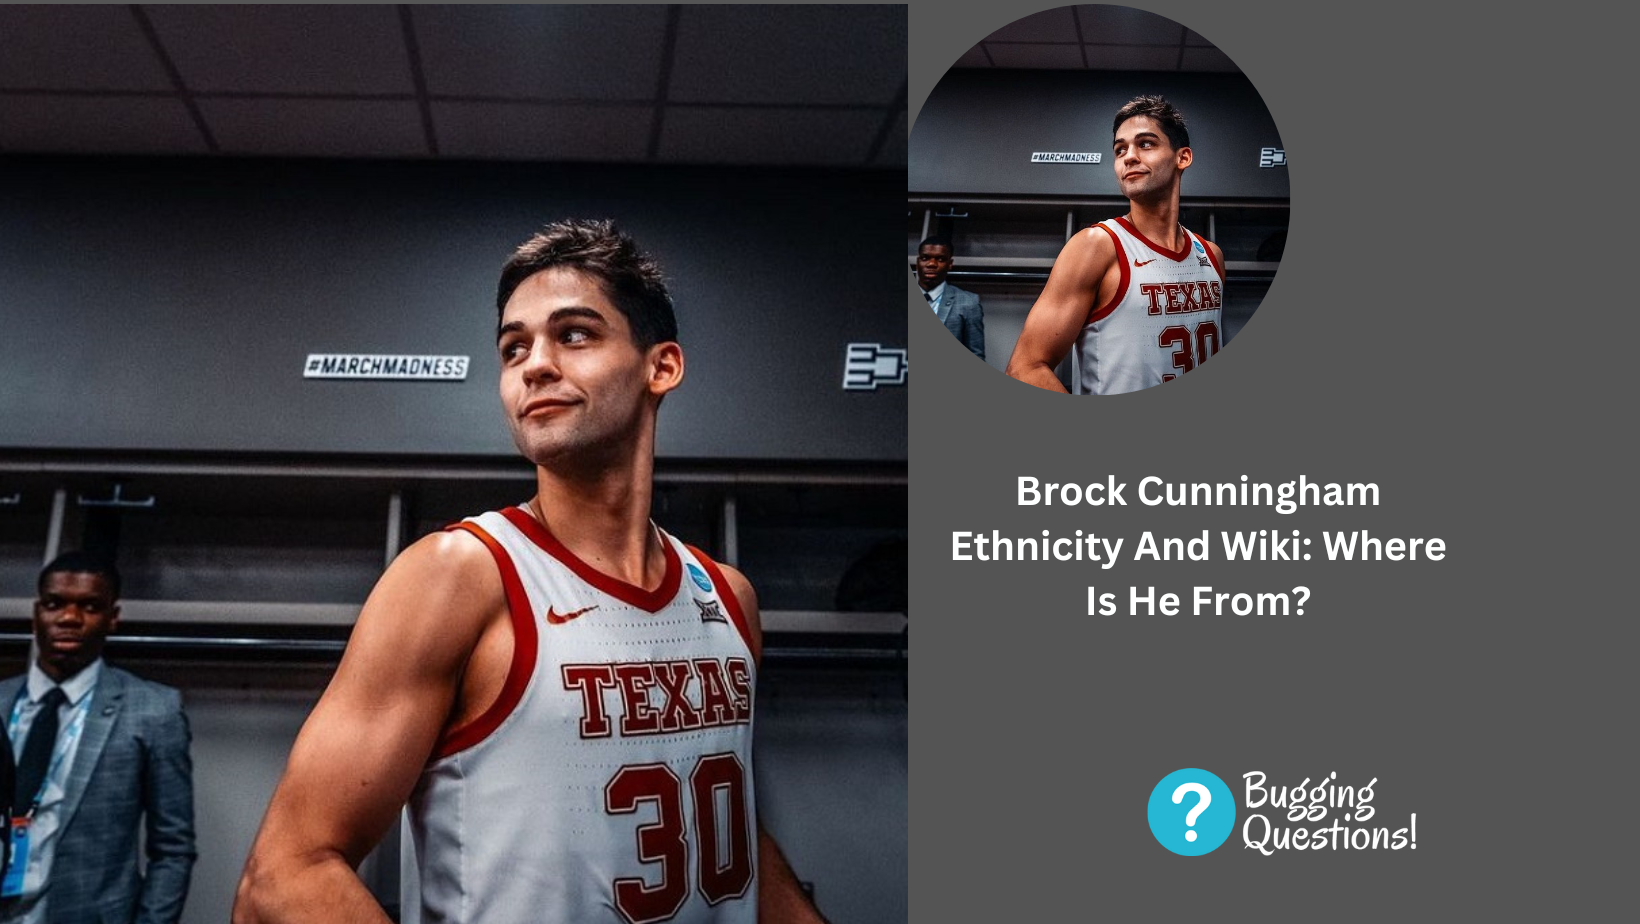 Brock Cunningham Ethnicity And Wiki: Where Is He From?